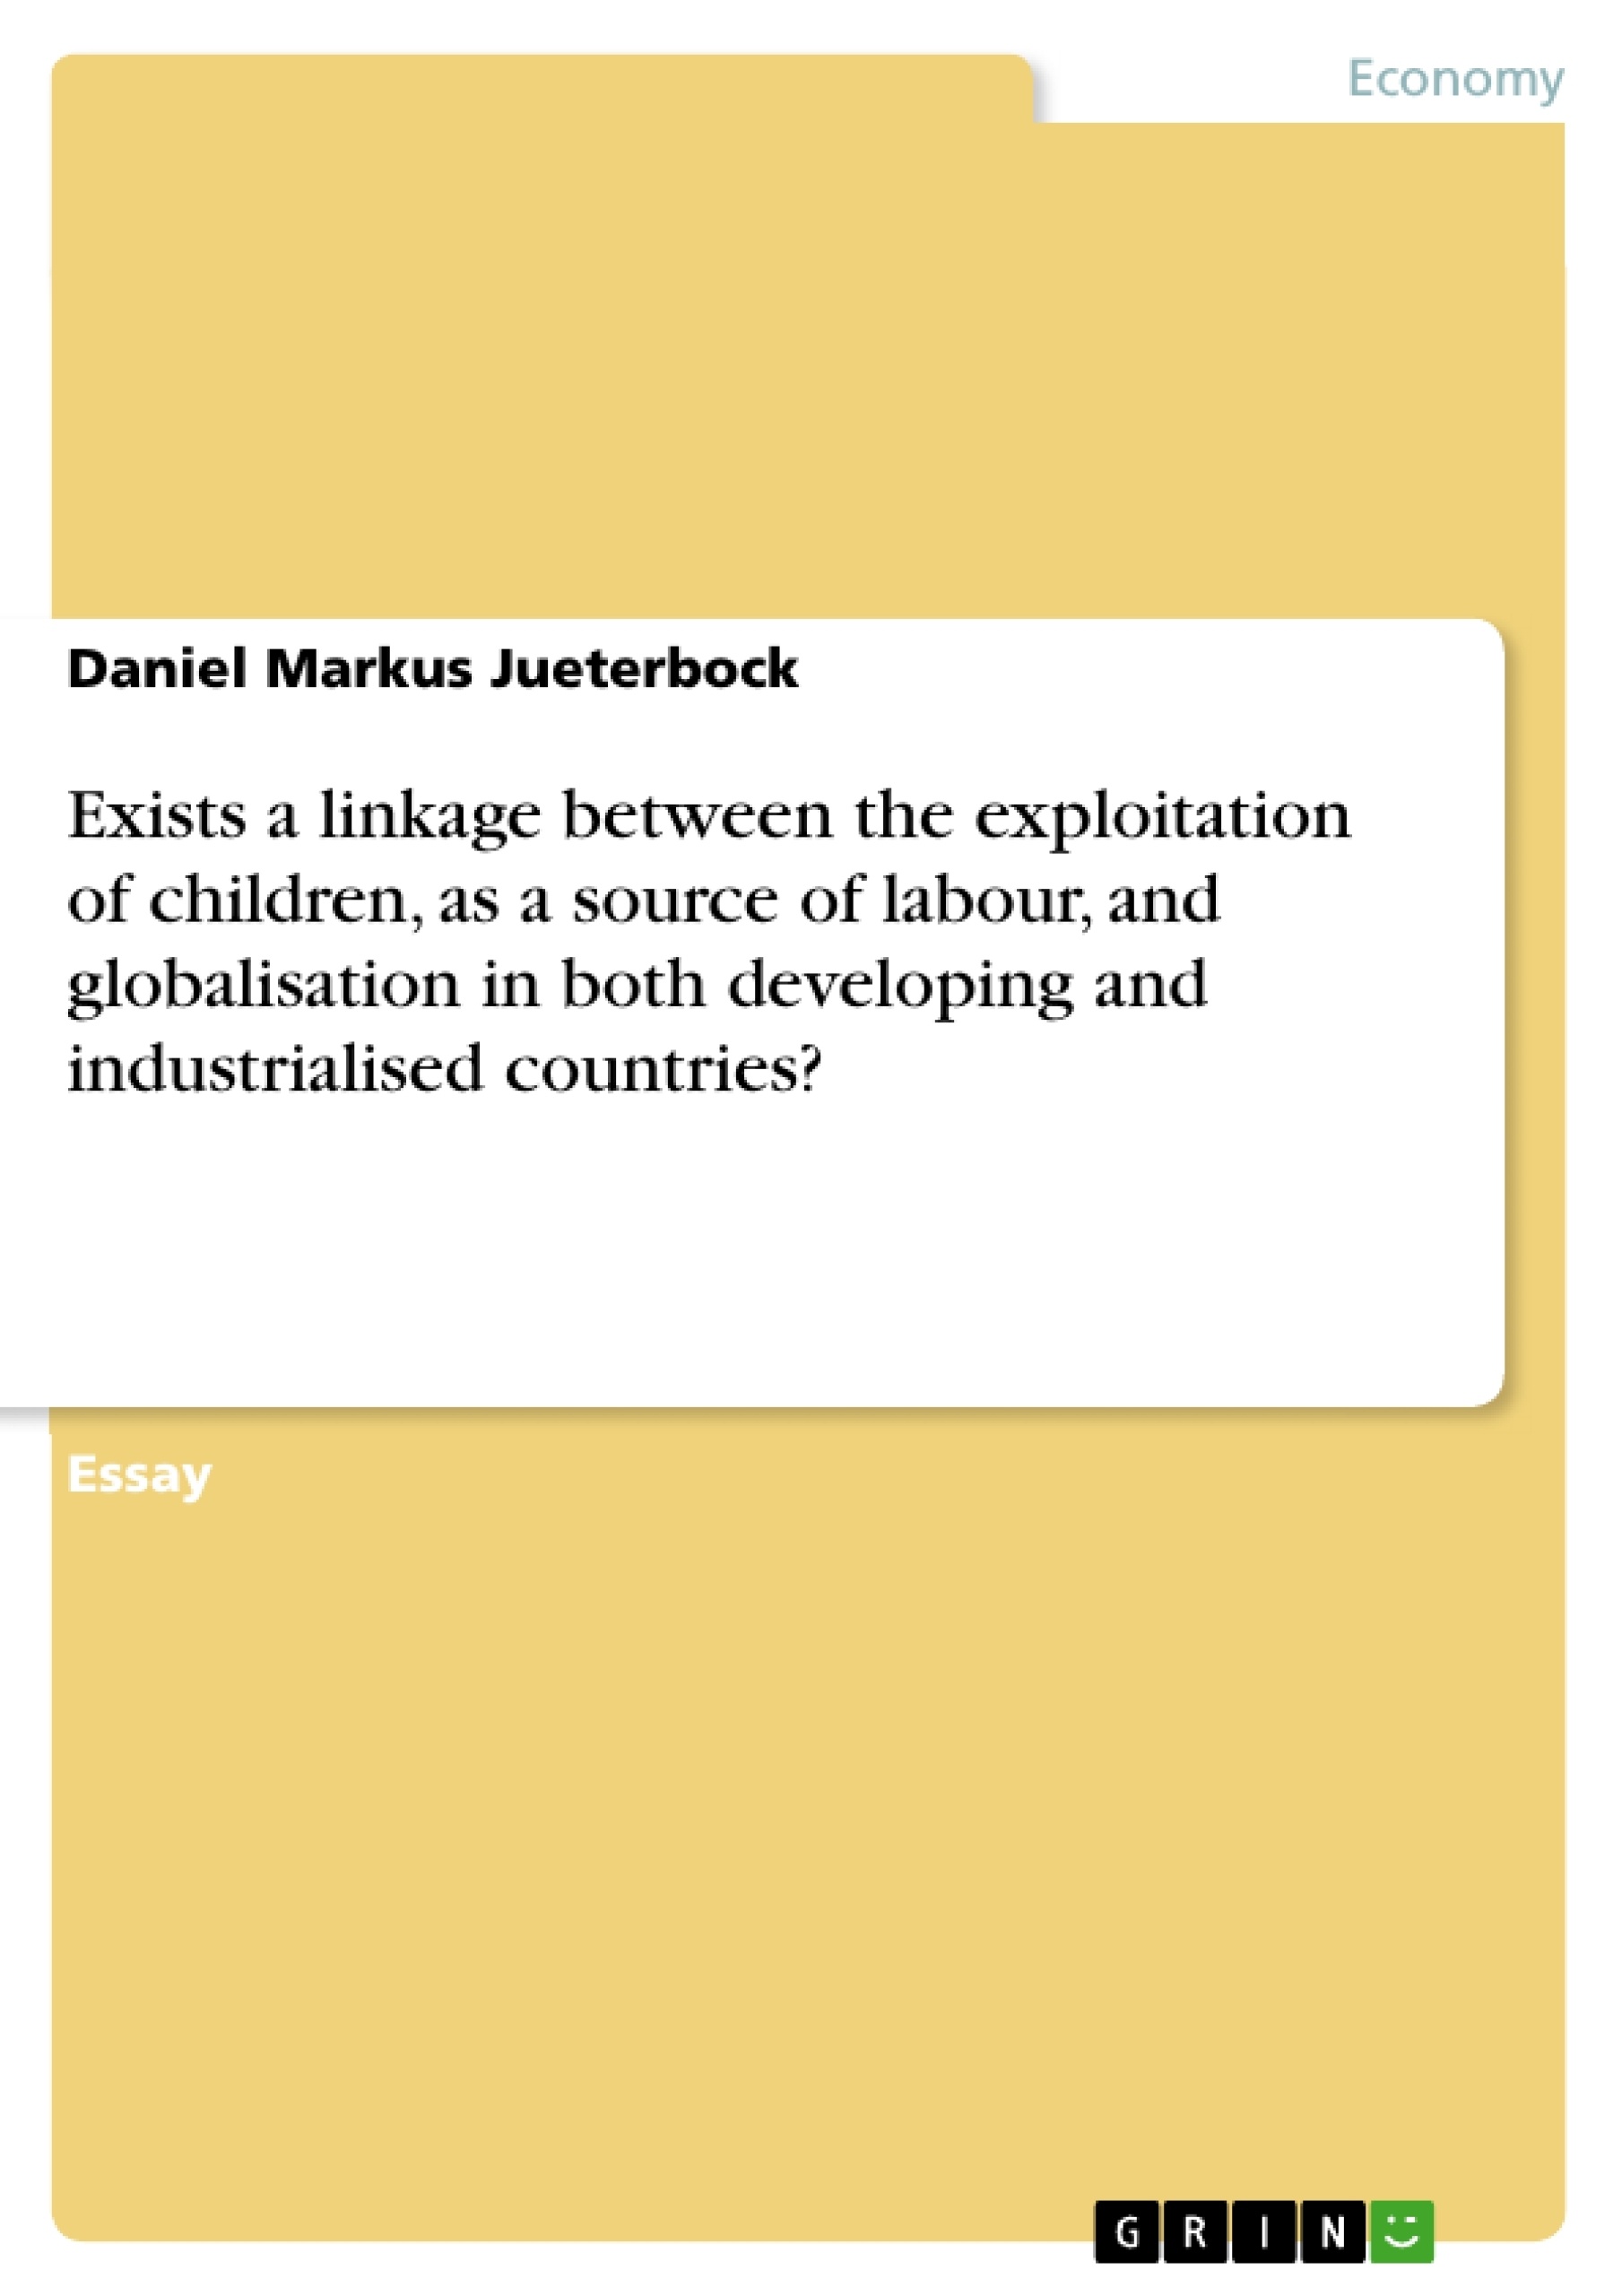 Titre: Exists a linkage between the exploitation of children, as a source of labour, and globalisation in both developing and industrialised countries?